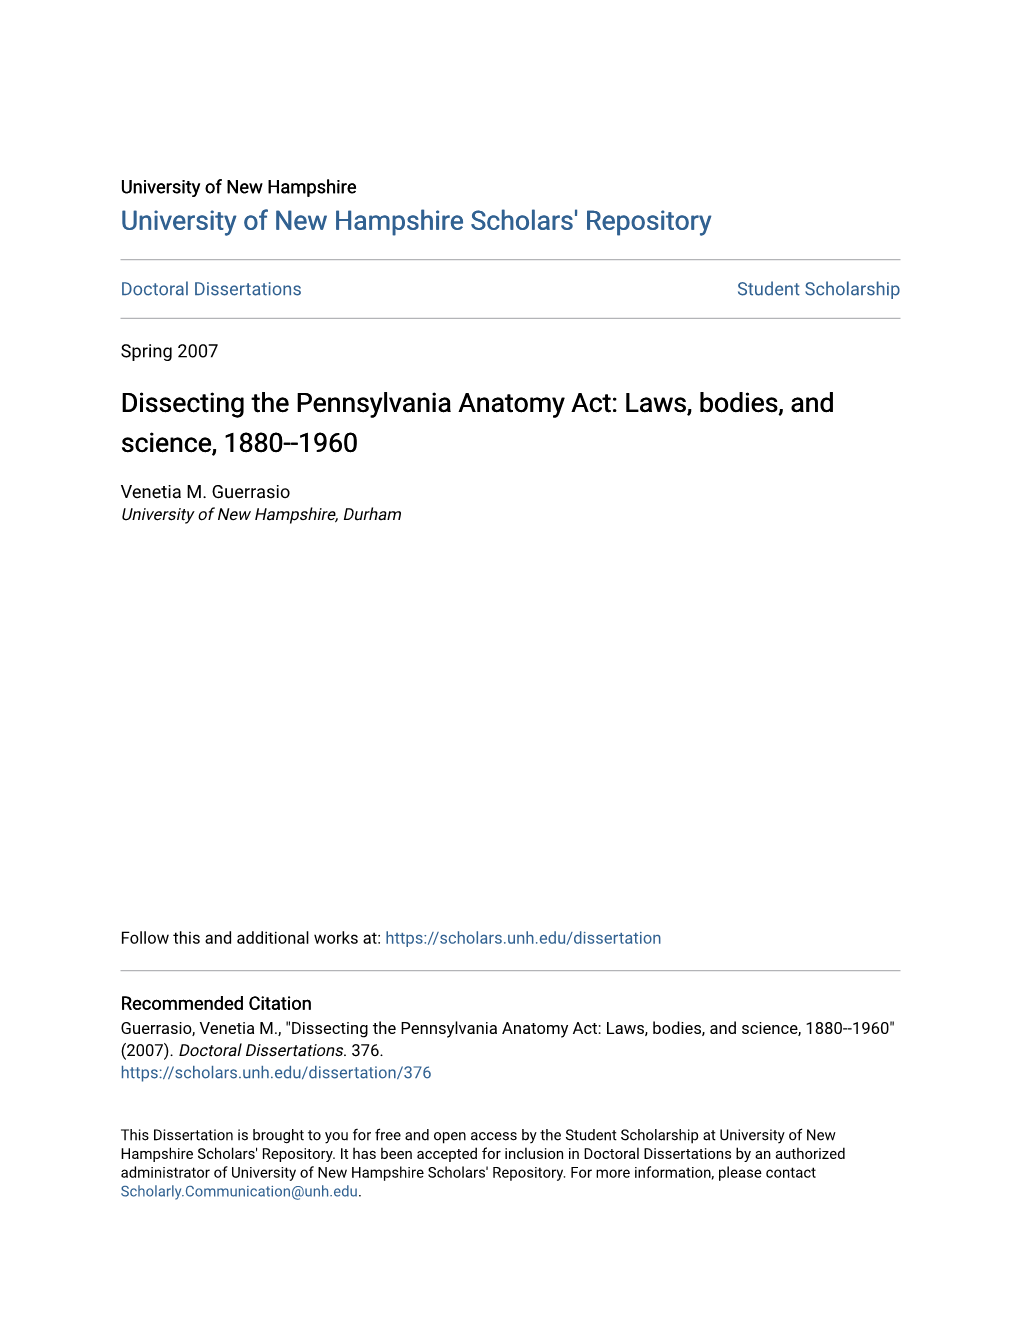 Dissecting the Pennsylvania Anatomy Act: Laws, Bodies, and Science, 1880--1960